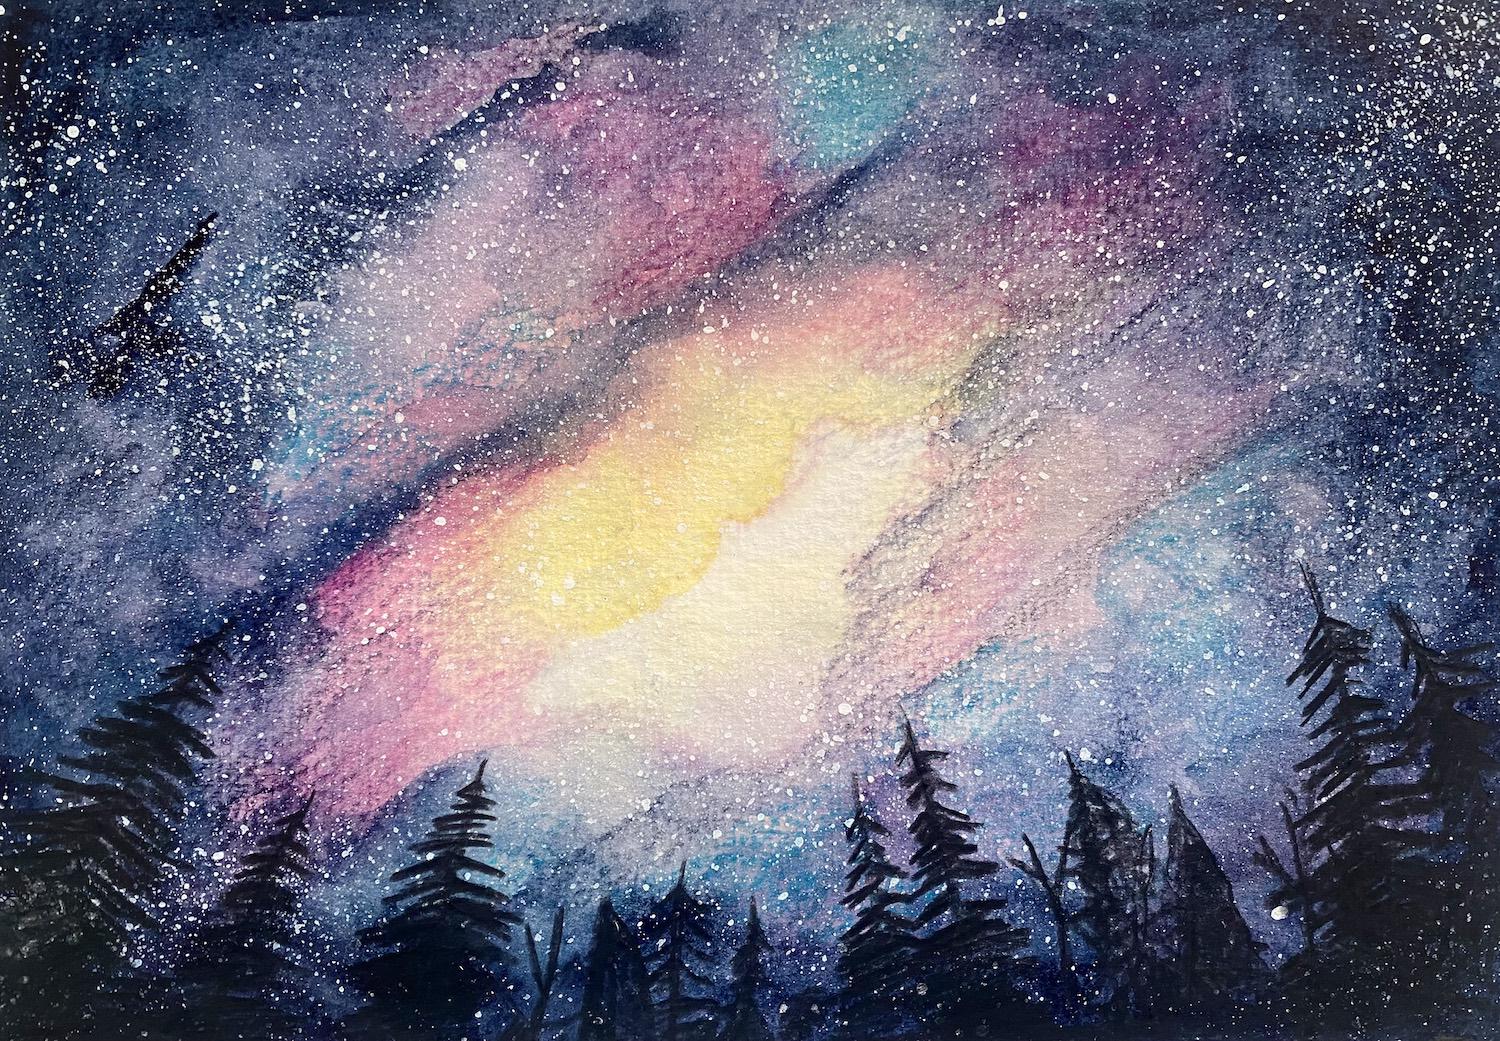 A watercolour painting of a vibrant night sky with silhouetted trees in the foreground, by Adam Westbrook